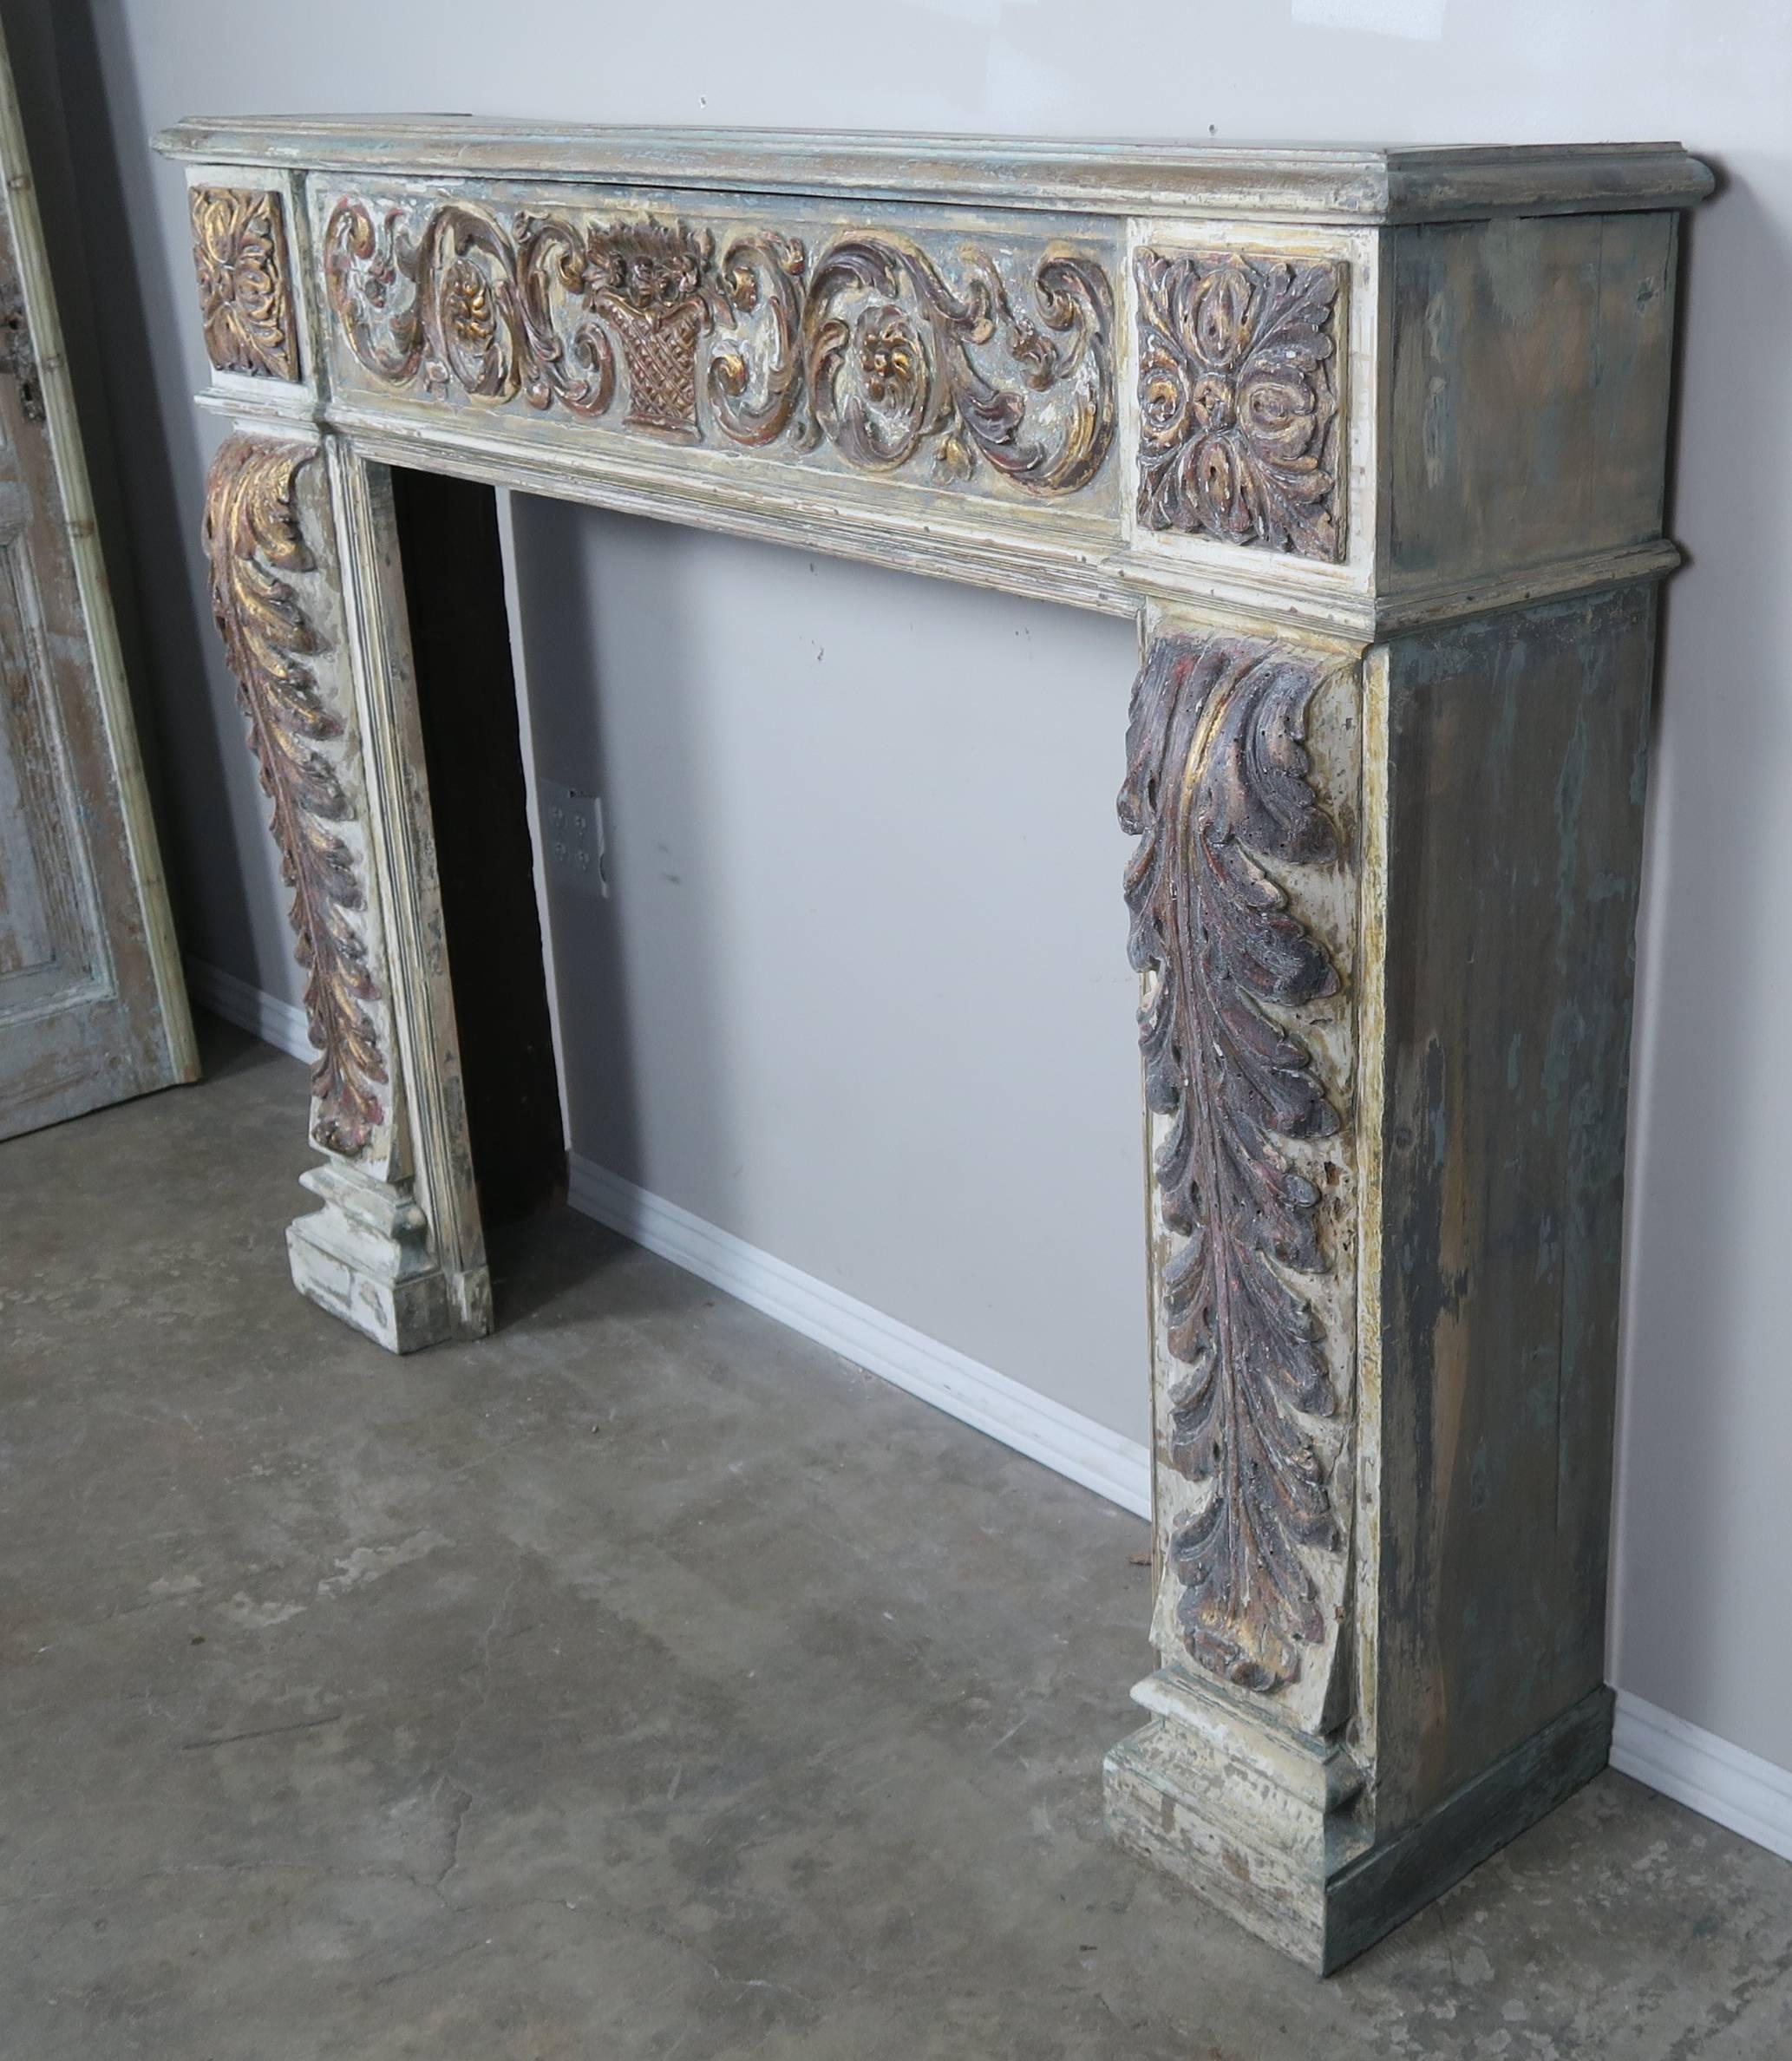 Neoclassical 19th Century Italian Painted and Parcel-Gilt Fireplace Mantel